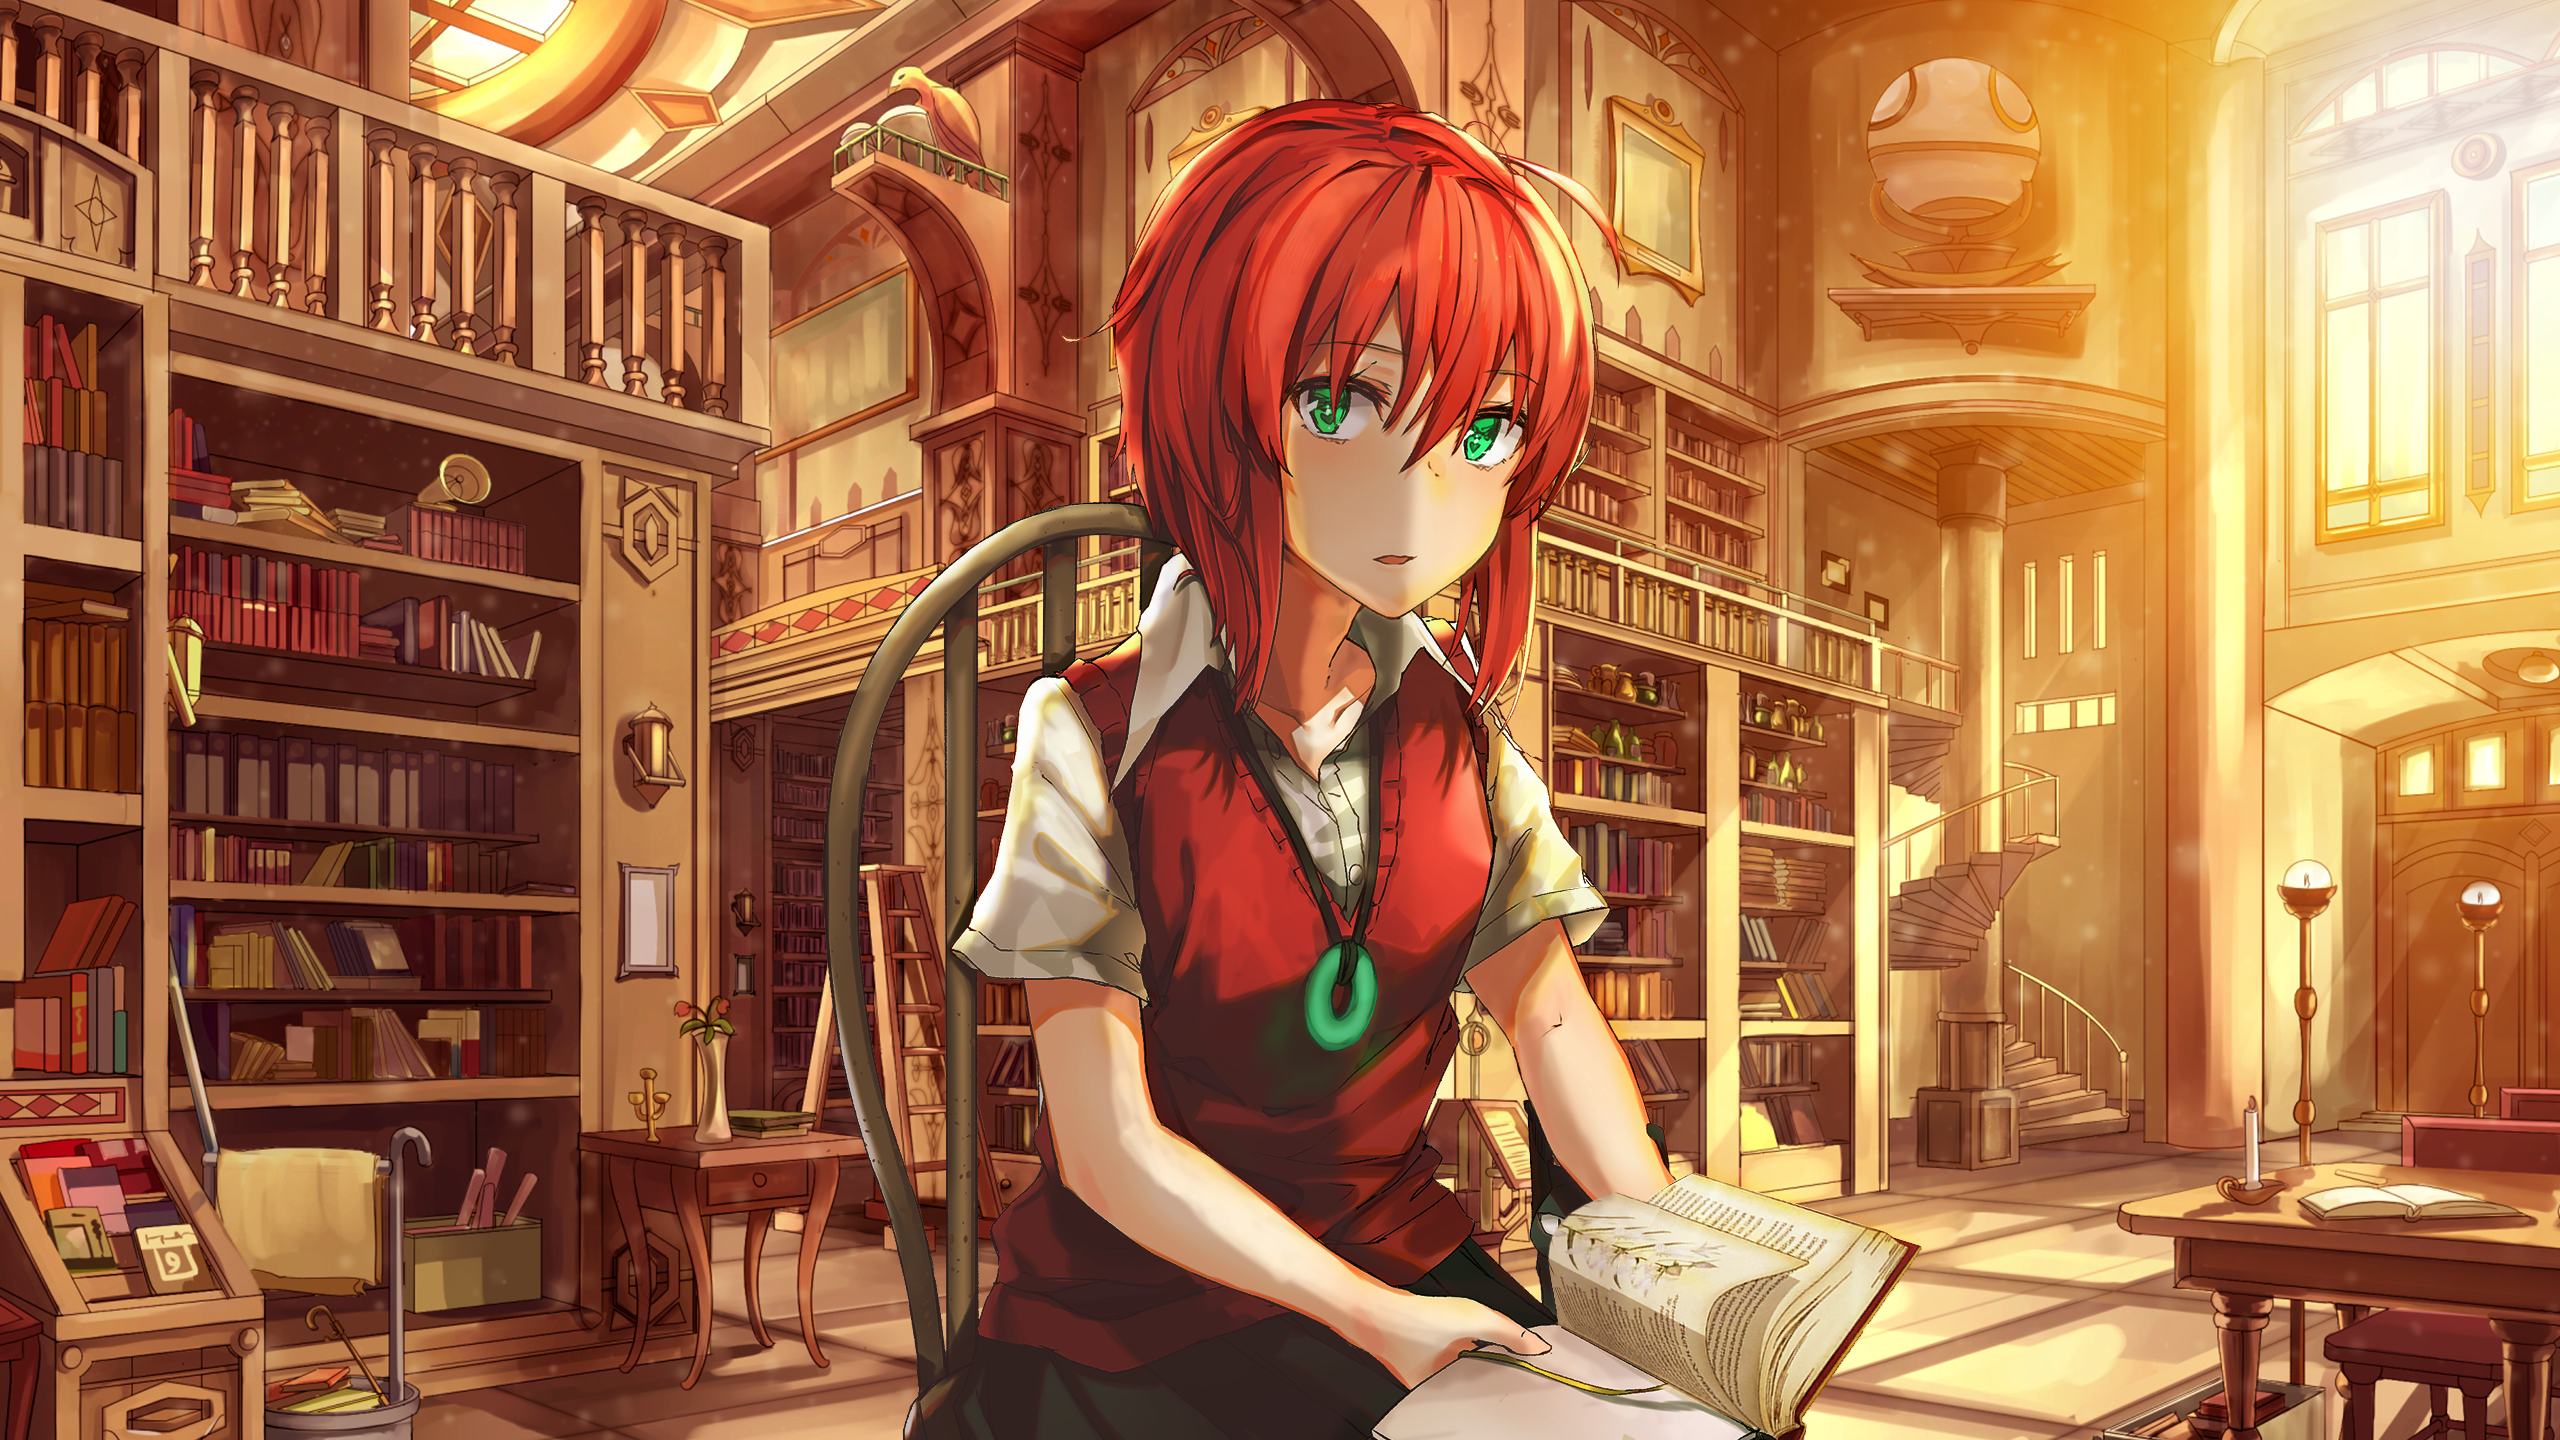 Chise's Dream by Niko_